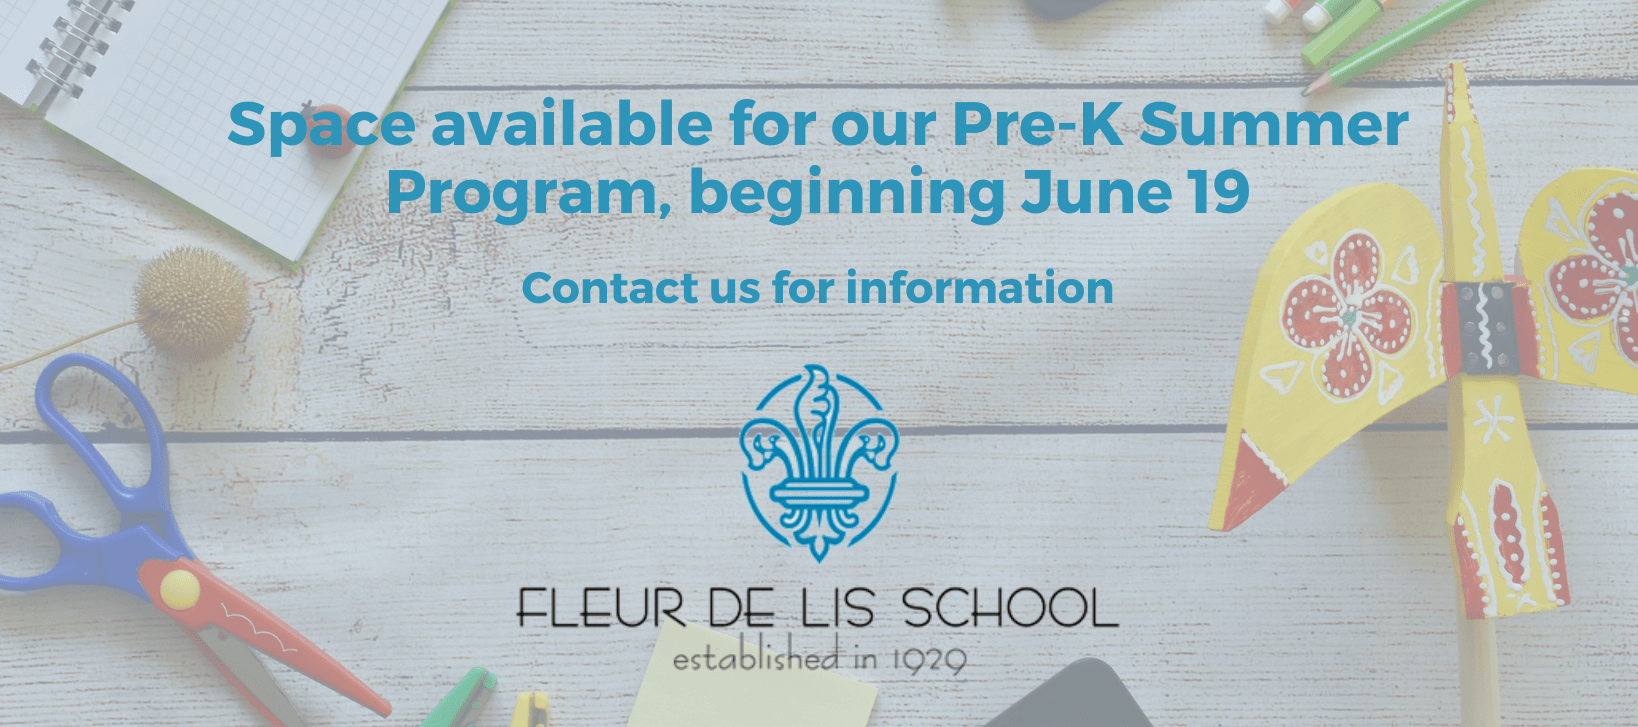 Space available for our Pre-K Summer program, beginning June 19